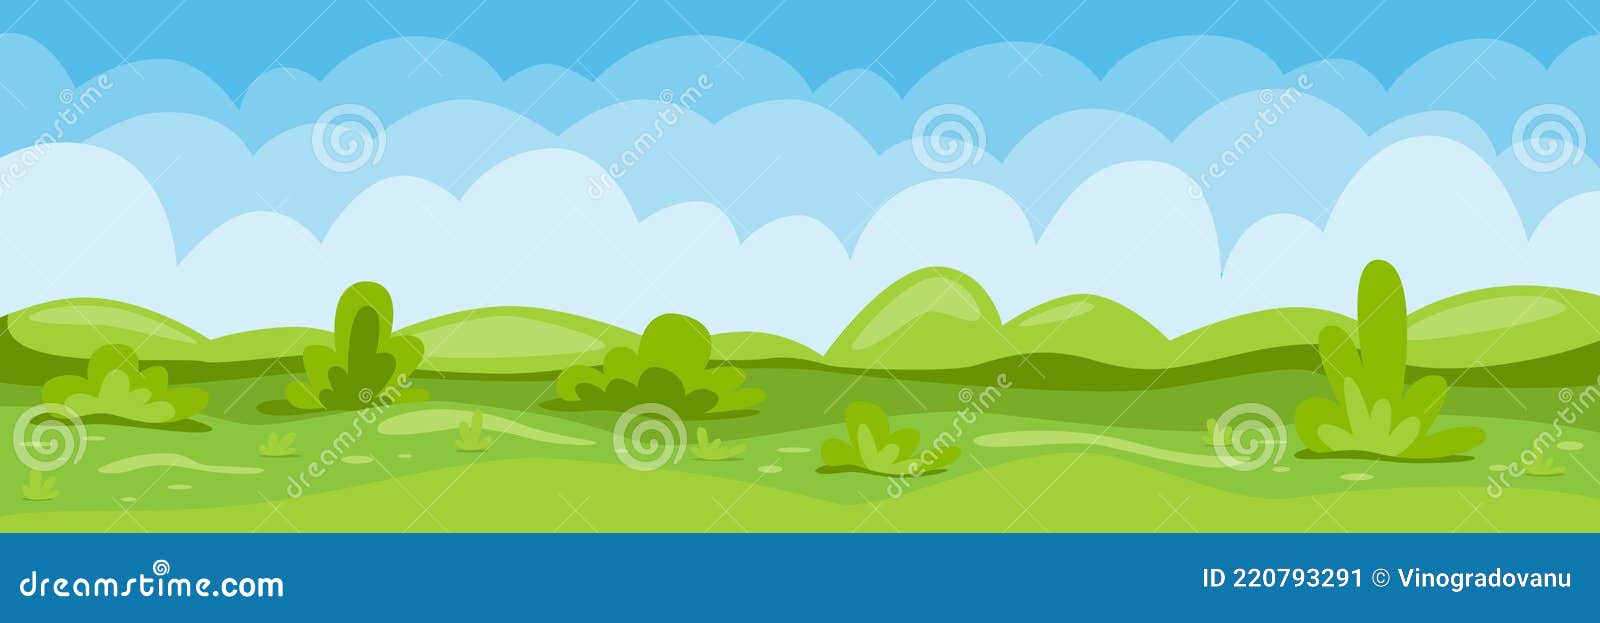 Landscape Summer Background With Cloudy Blue Skies Green Hills And